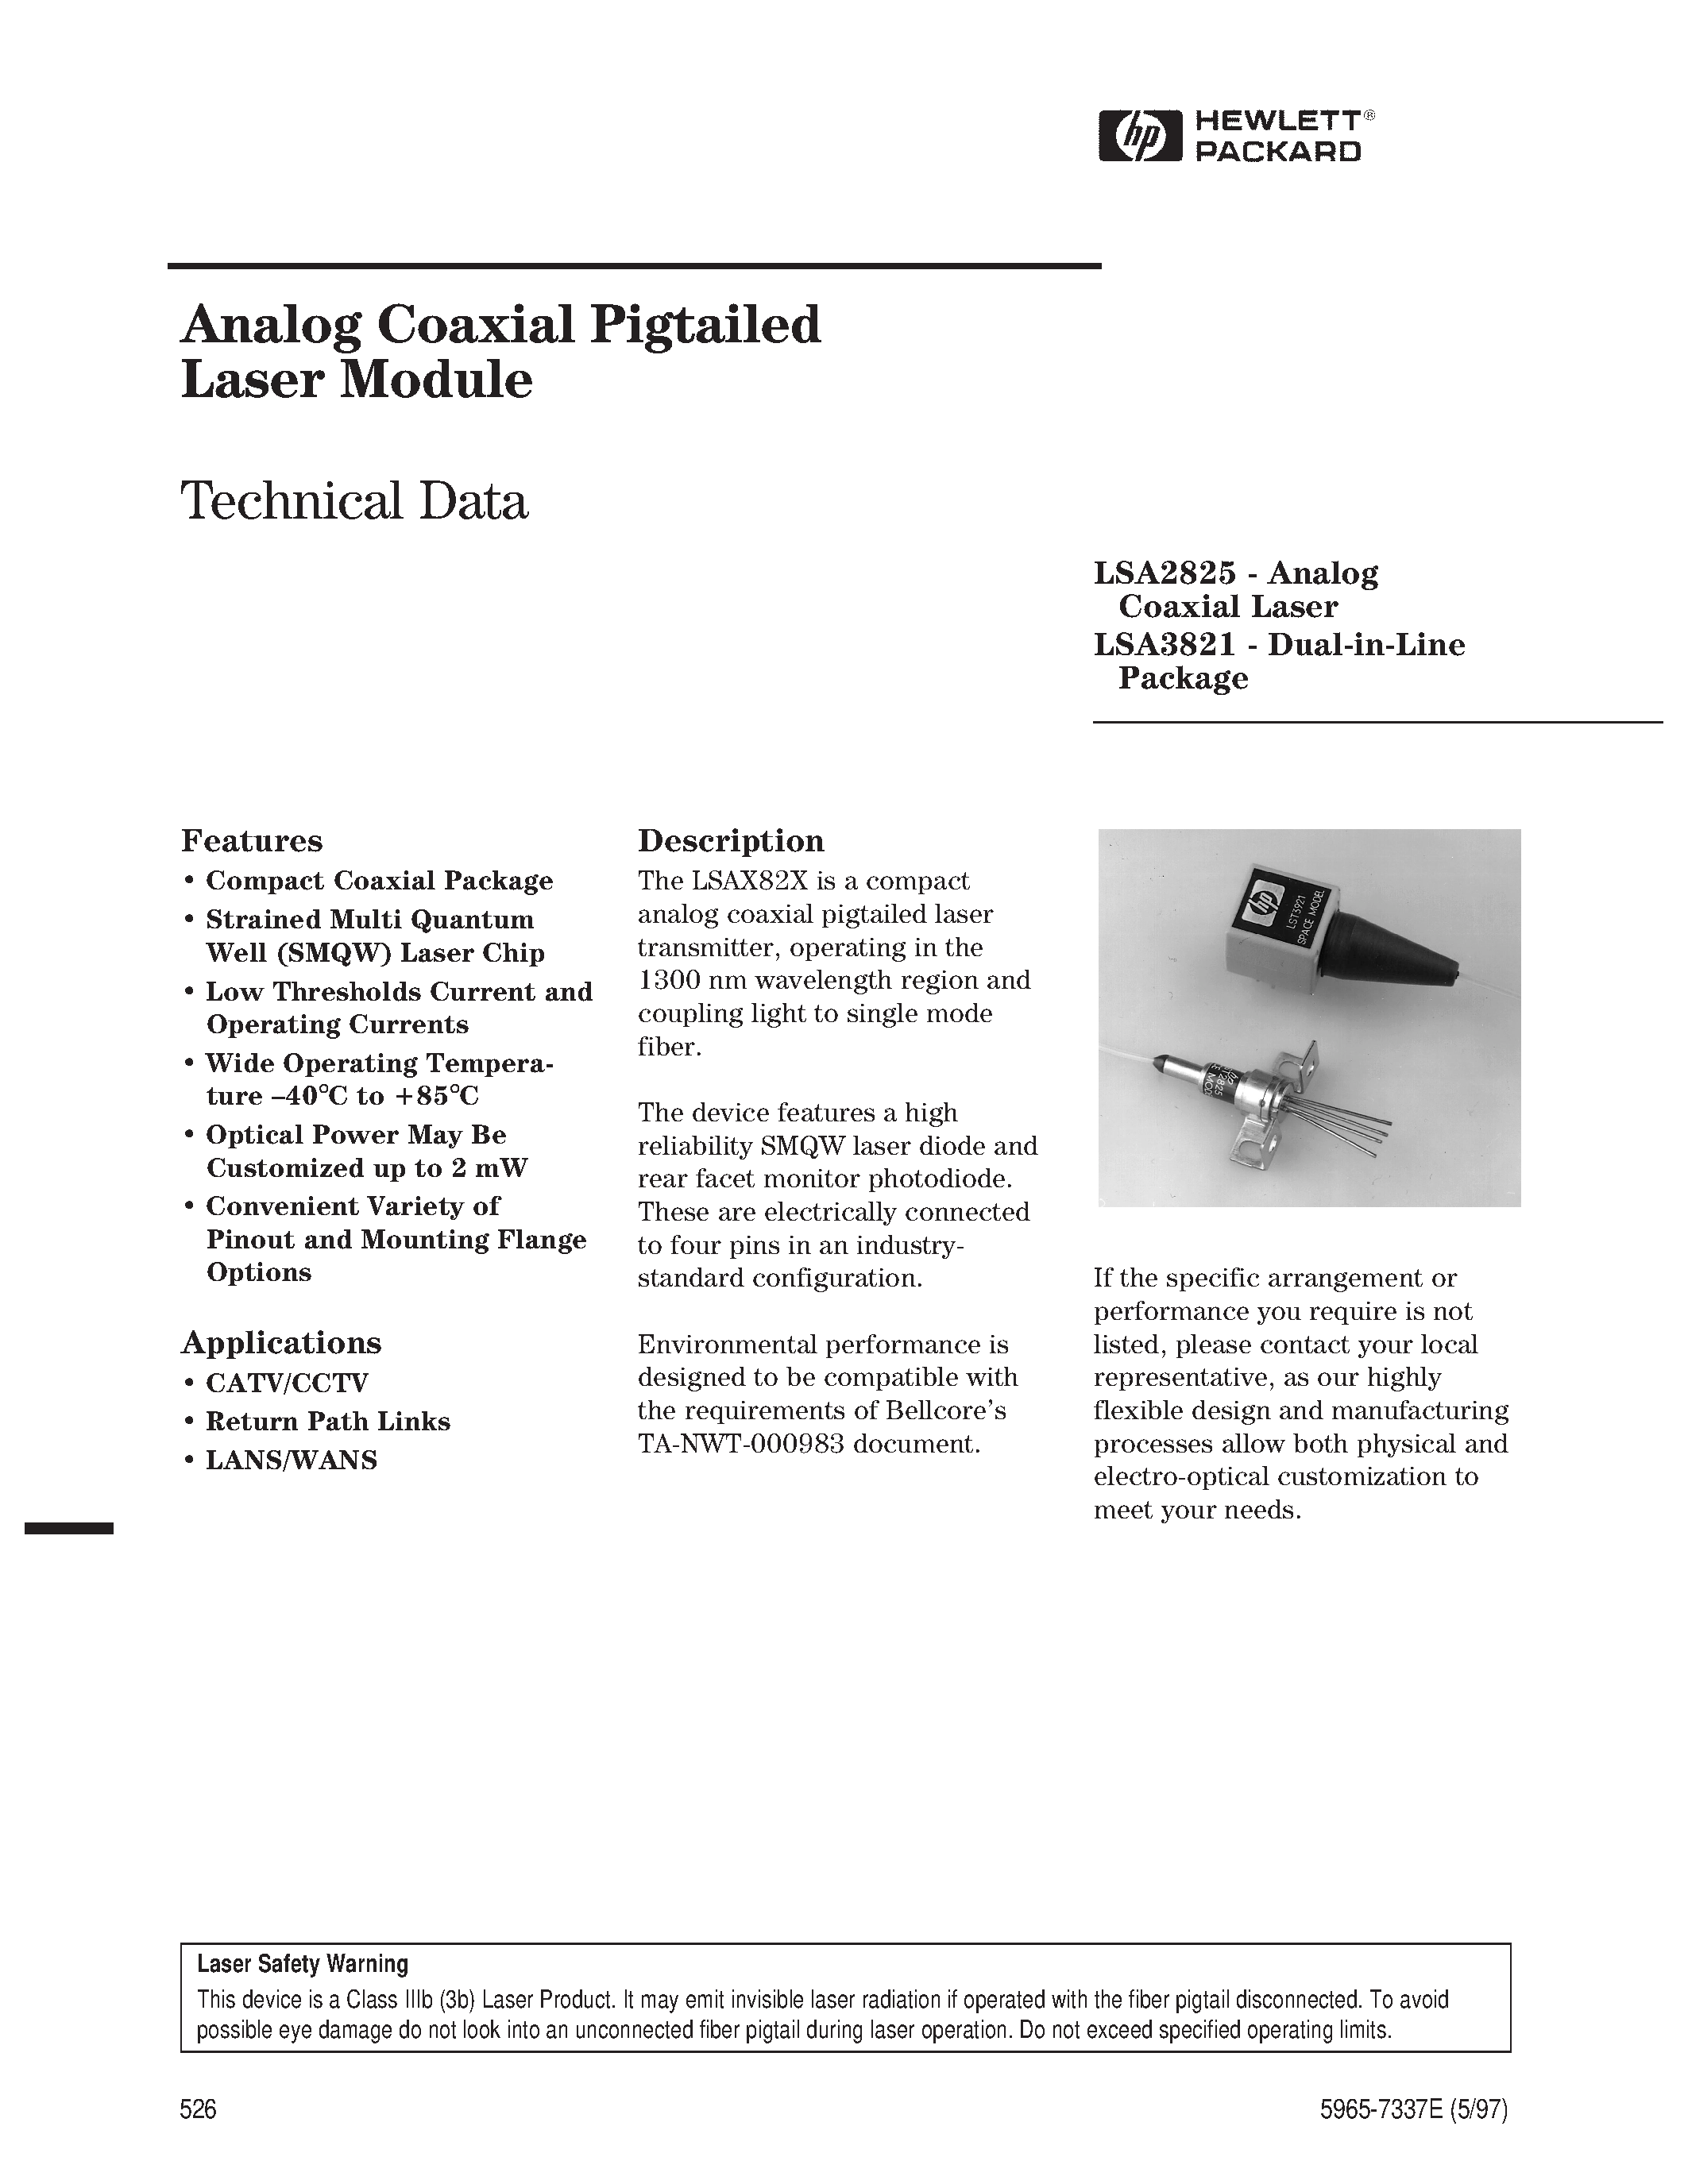 Datasheet LSA2825-T-AS - Analog Coaxial Pigtailed Laser Module page 1